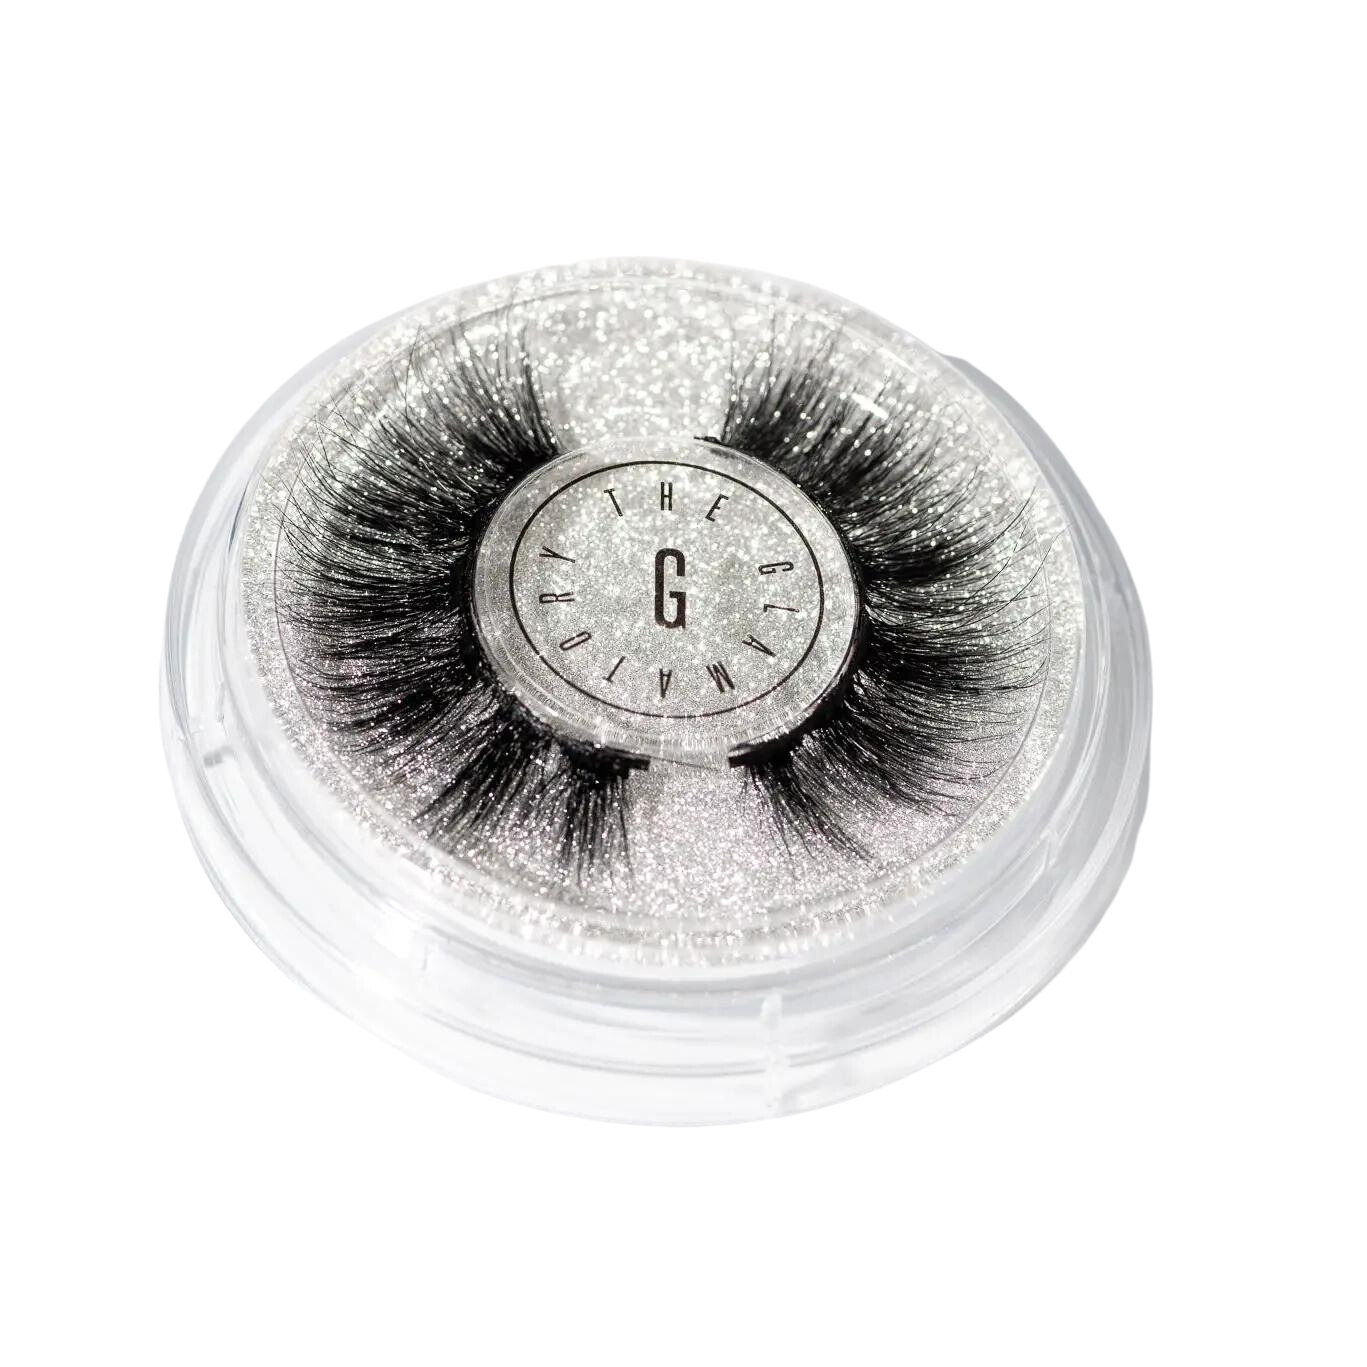 The Glamatory Luxe Lashes "GNO"